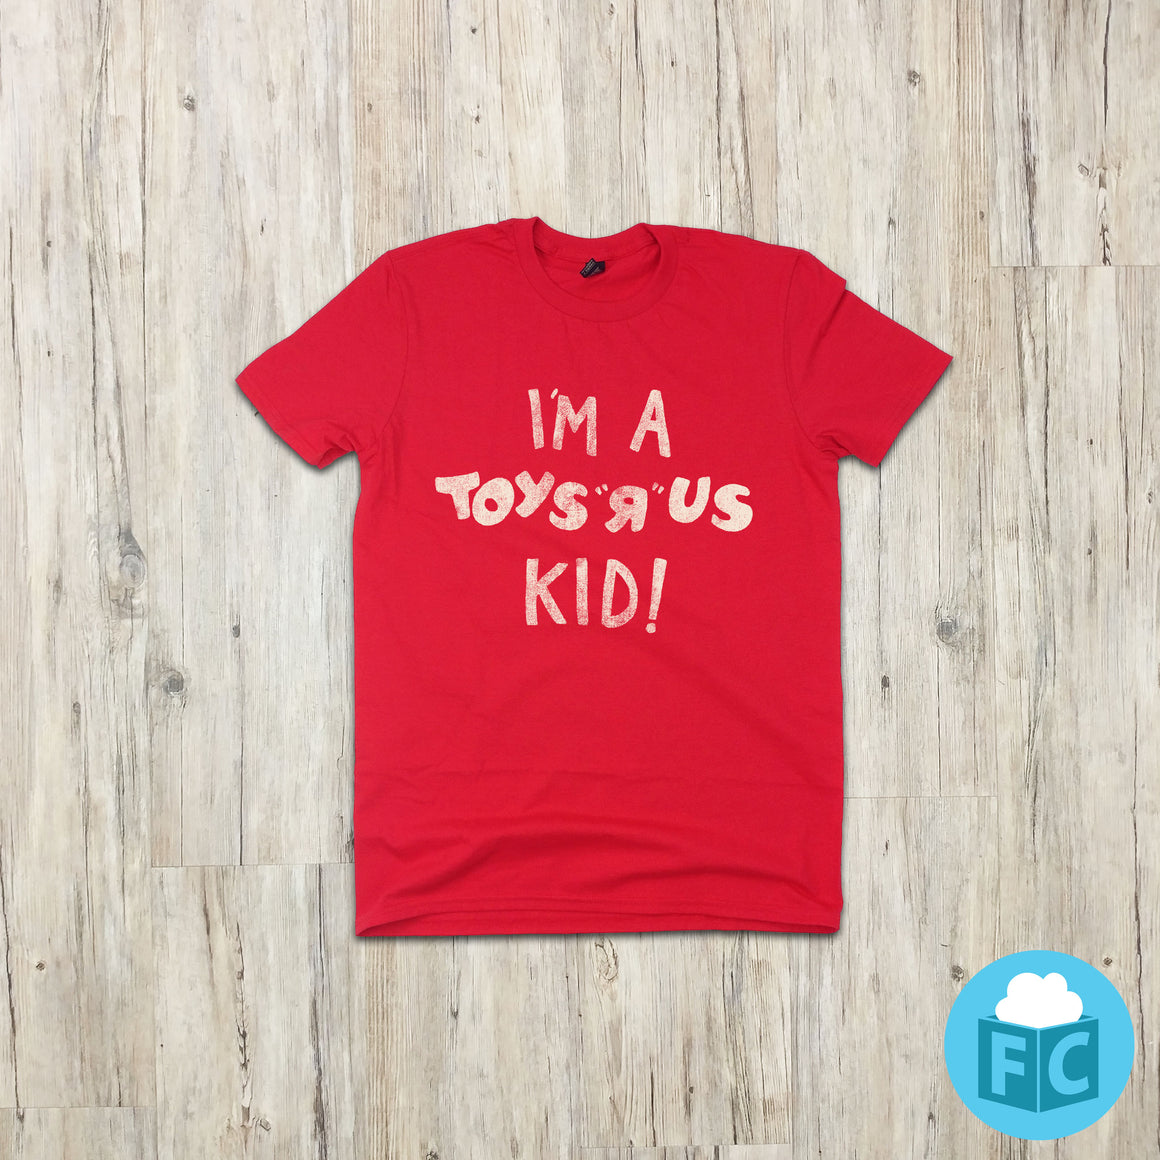 I'm A Toys R' Us Kid - Youth Tee